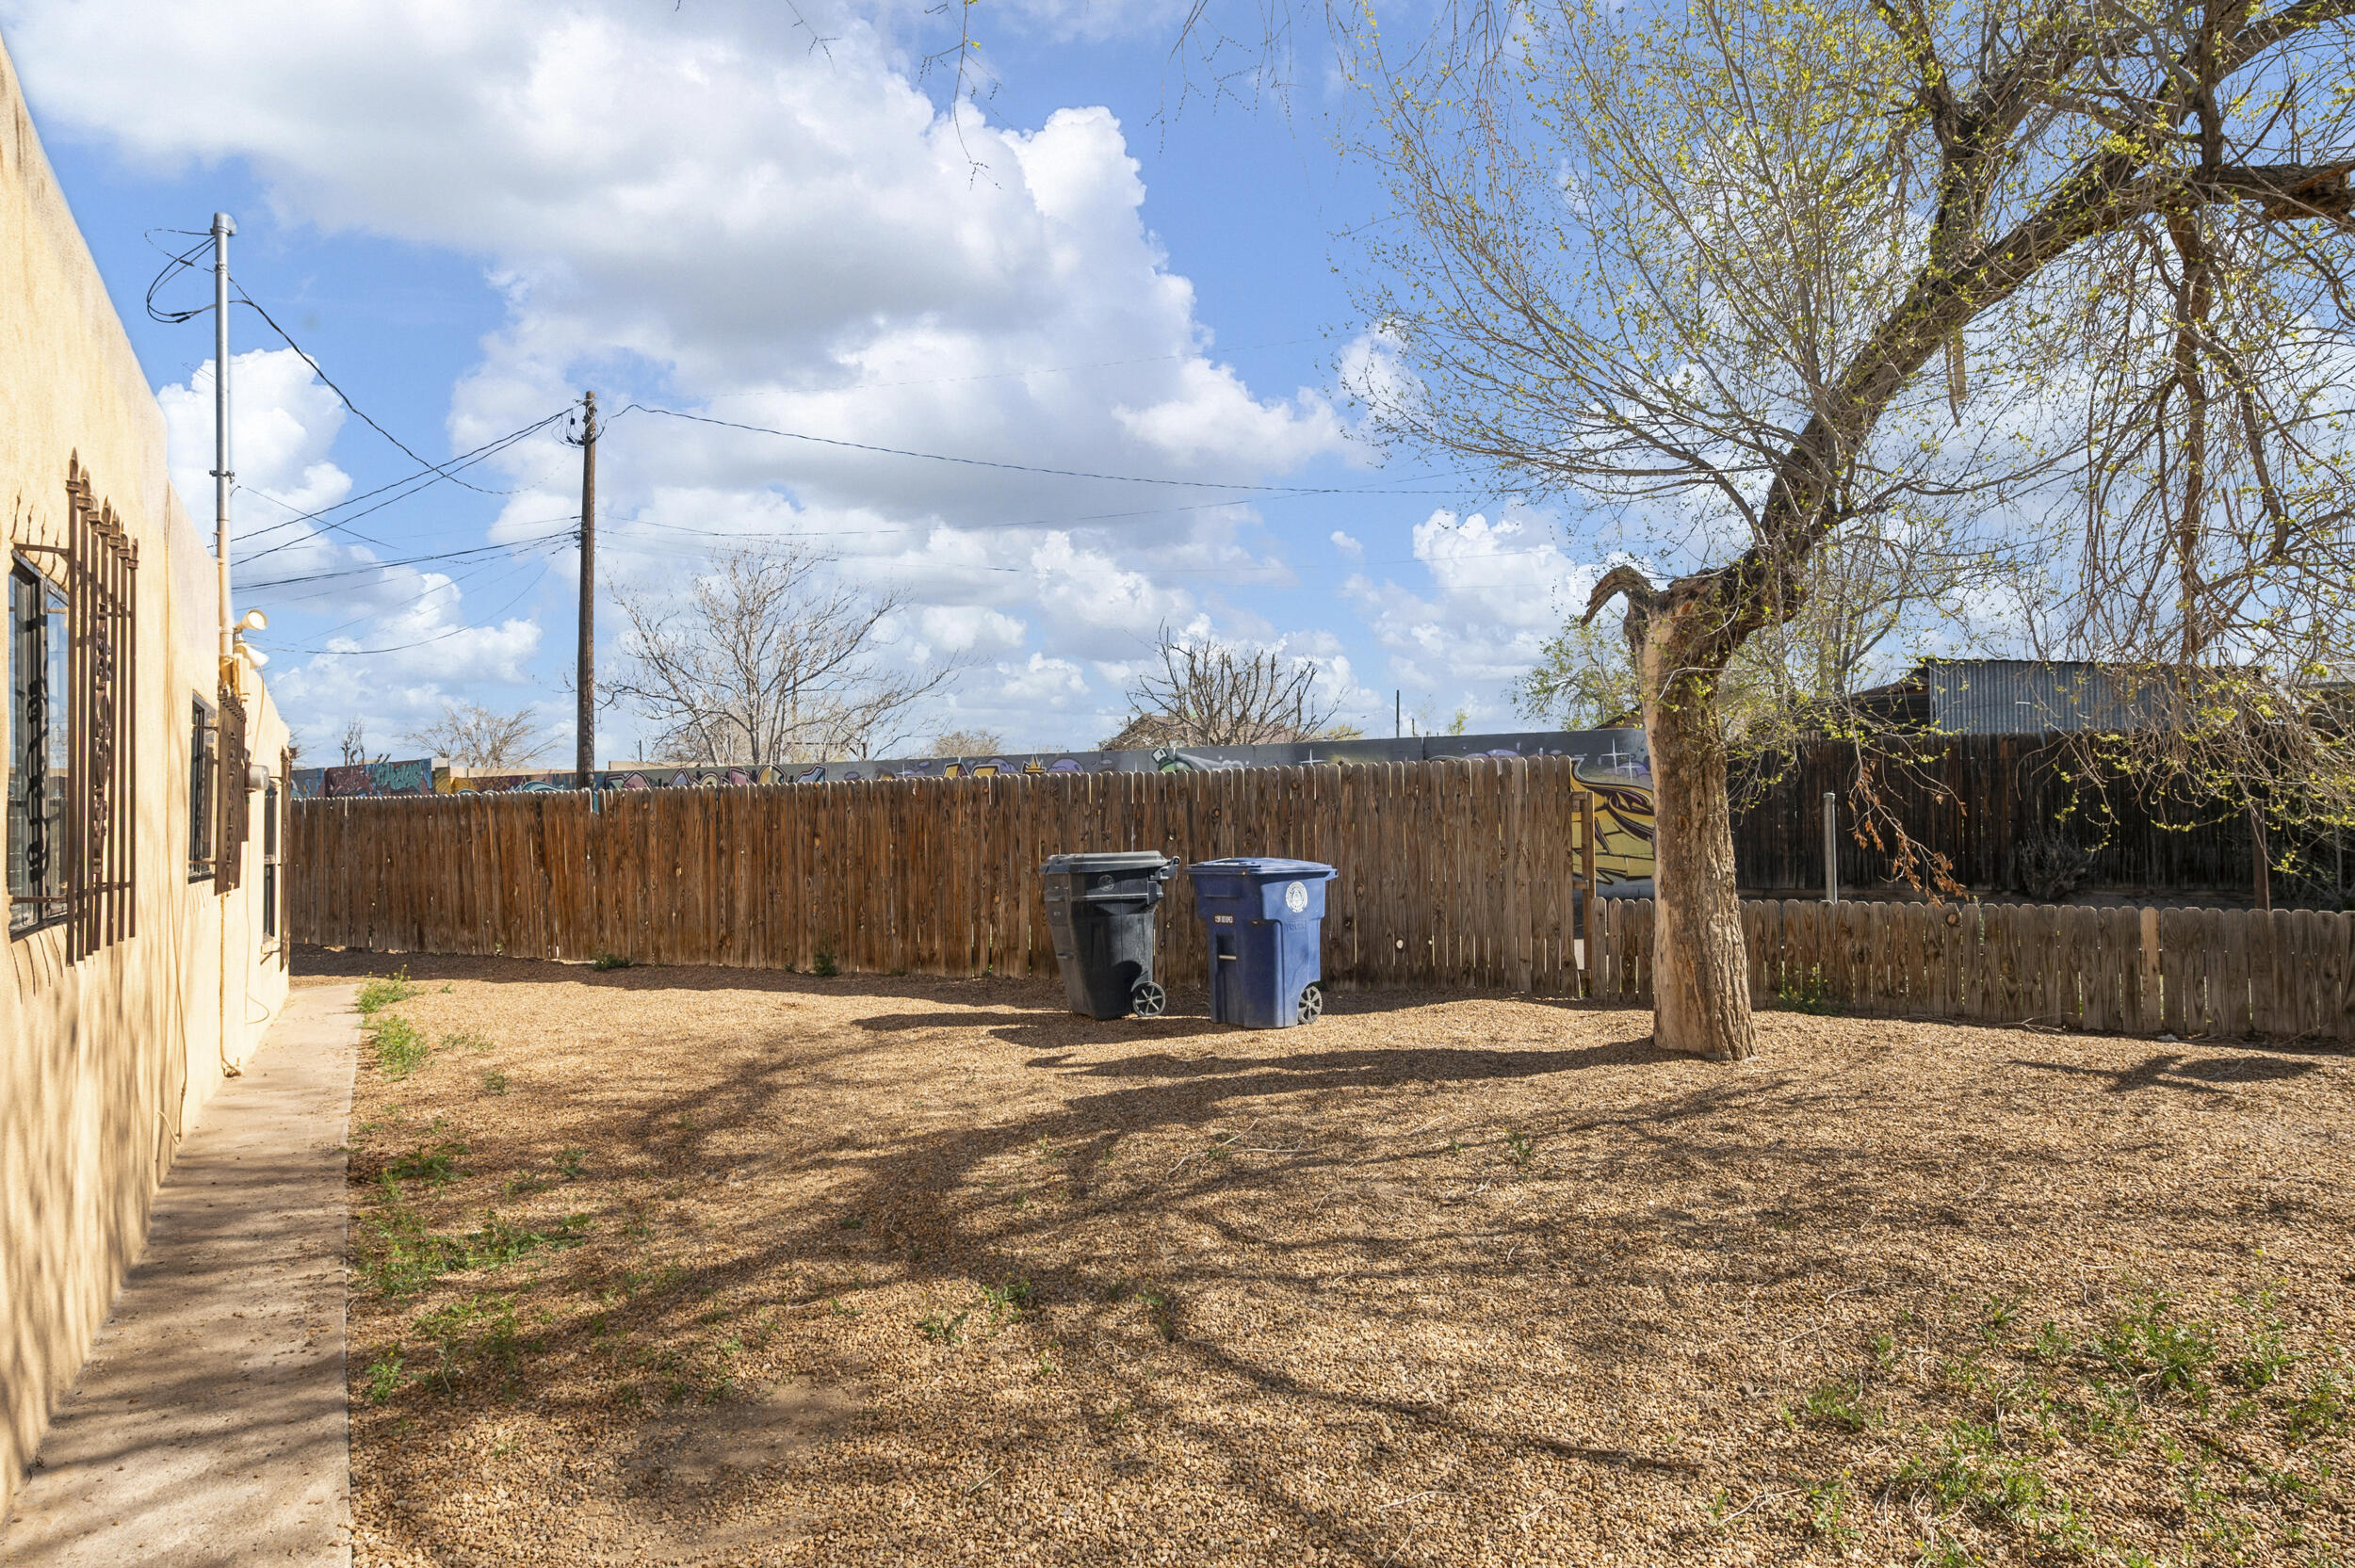 231 Southern Avenue SE, Albuquerque, New Mexico 87102, 2 Bedrooms Bedrooms, ,1 BathroomBathrooms,Residential,For Sale,231 Southern Avenue SE,1059517